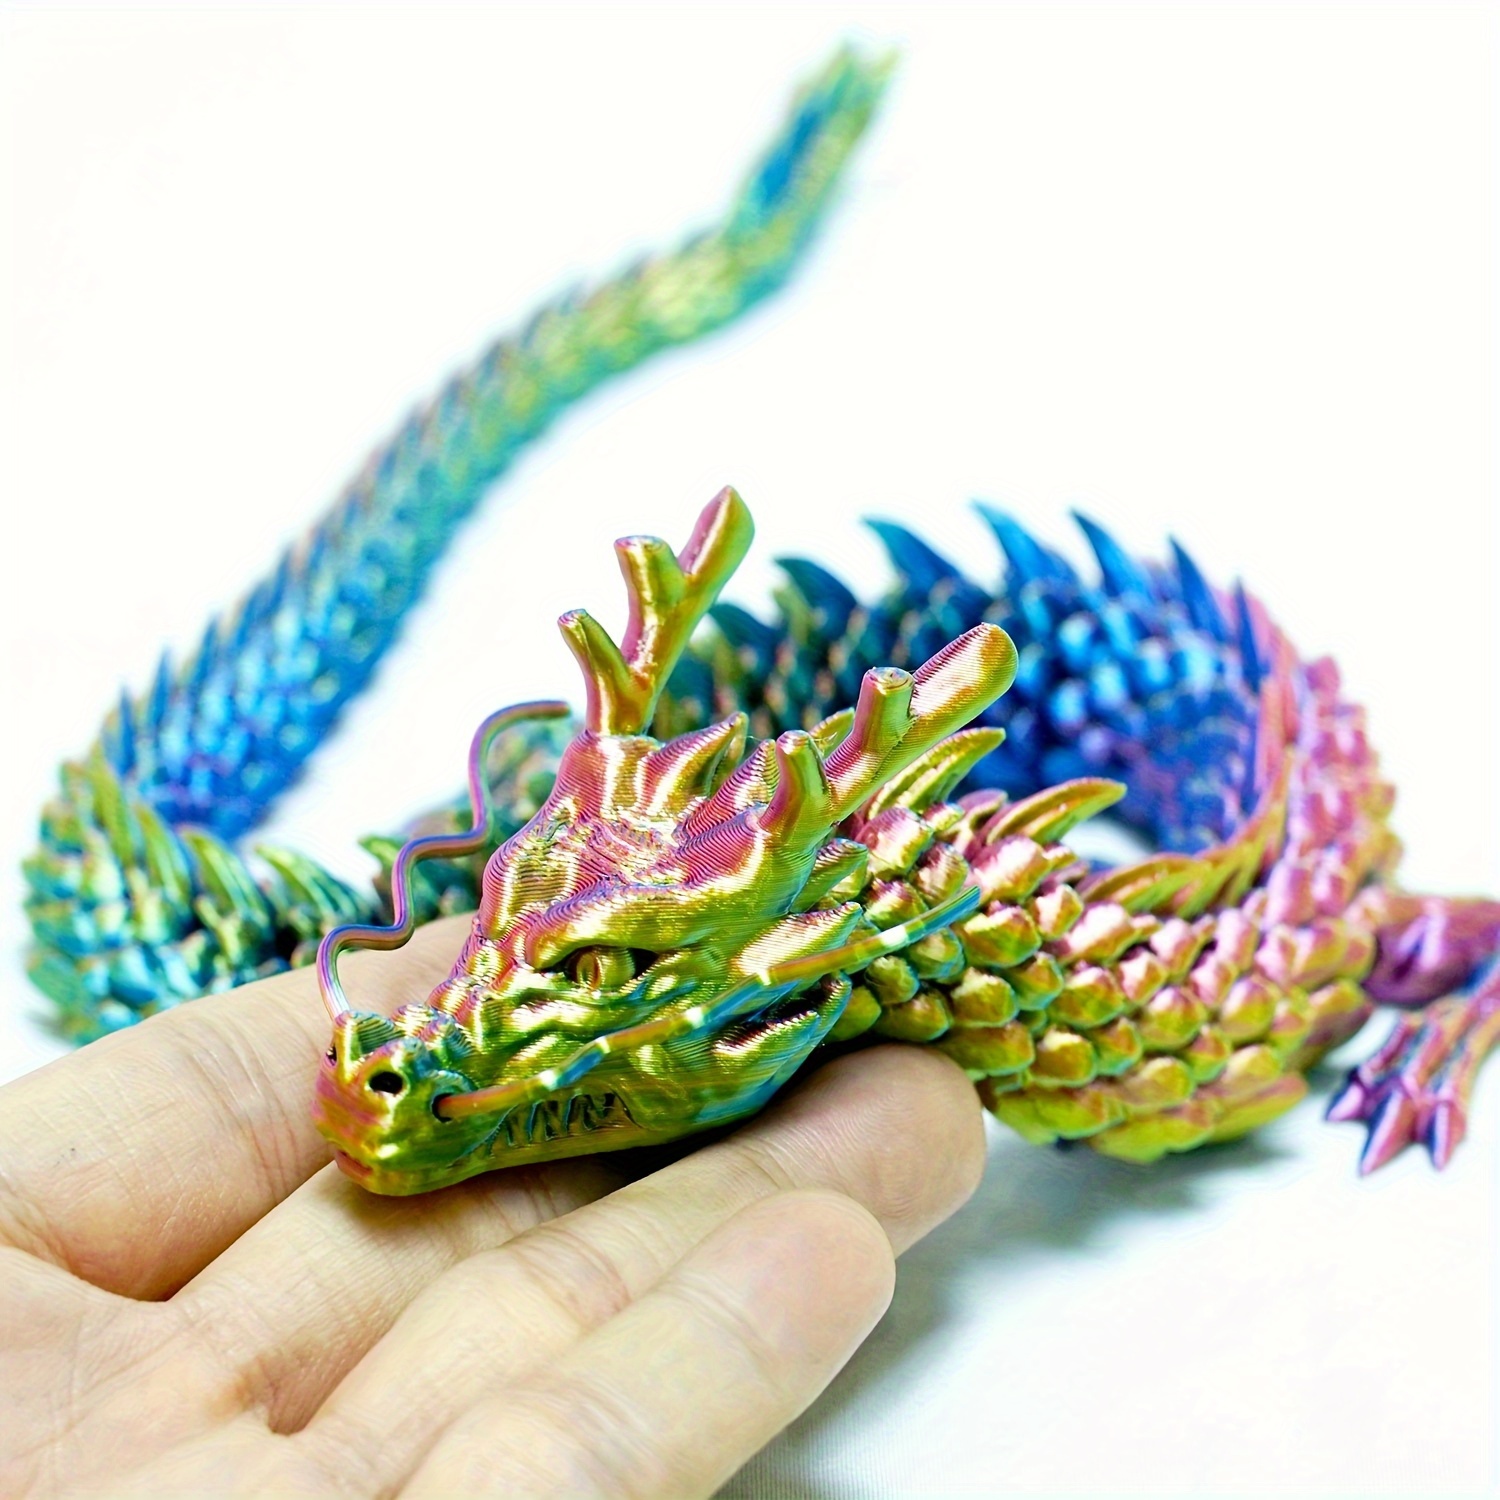 Dragon Egg Fidget Toy Surprise, 3D Printed Dragon Egg with Dragon Inside  Fidget, Crystal Dragon Fidget Toy ADHD, Autism, Relief Anxiety for Adults  and